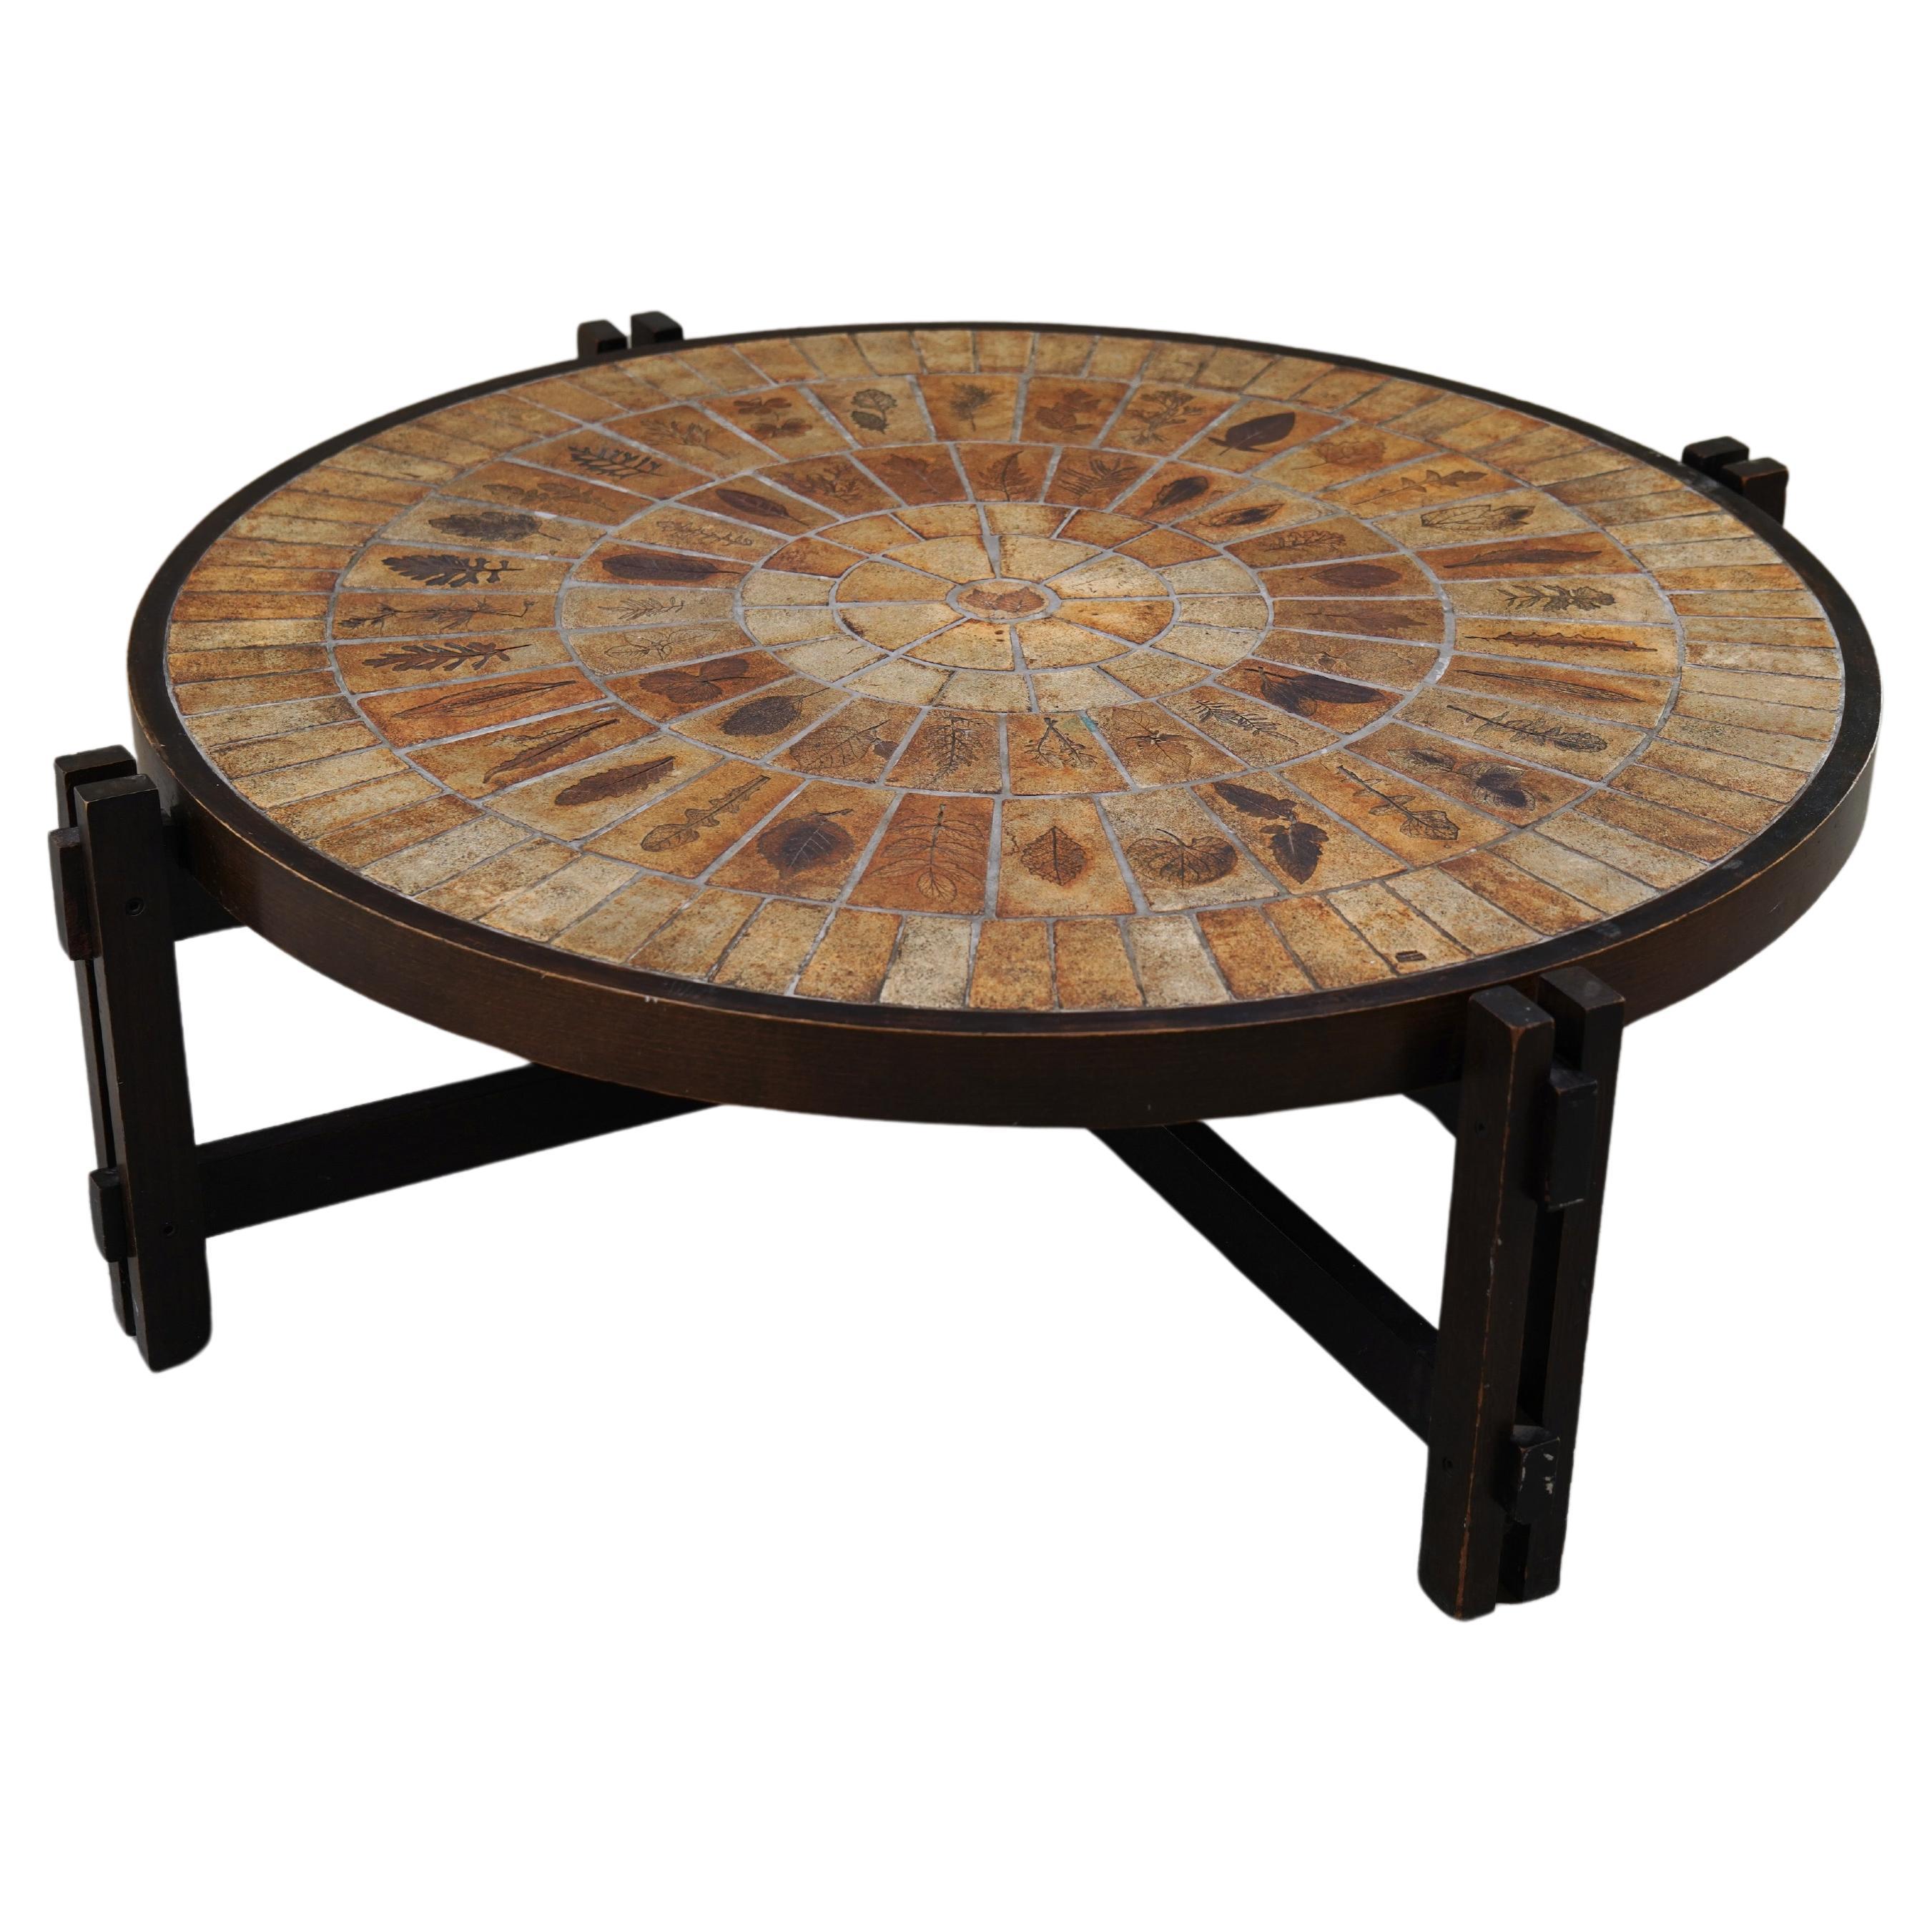 Roger Capron Round Coffee Table with Garrigue Tiles, France 1960s